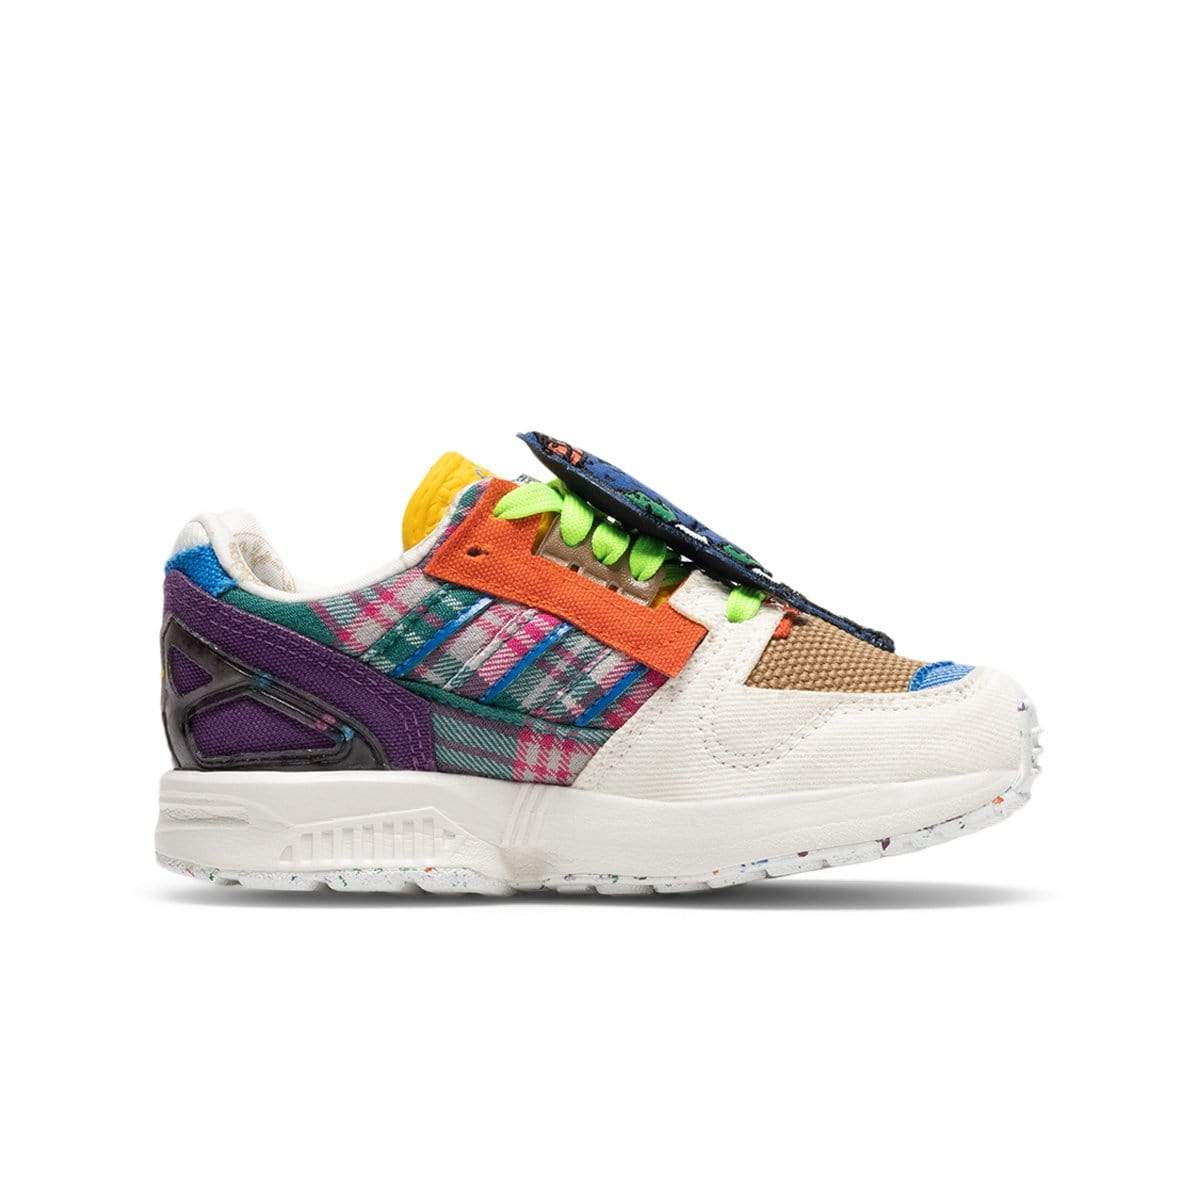 adidas Casual x Sean Wotherspoon ZX 8000 SUPEREARTH I (Kids)